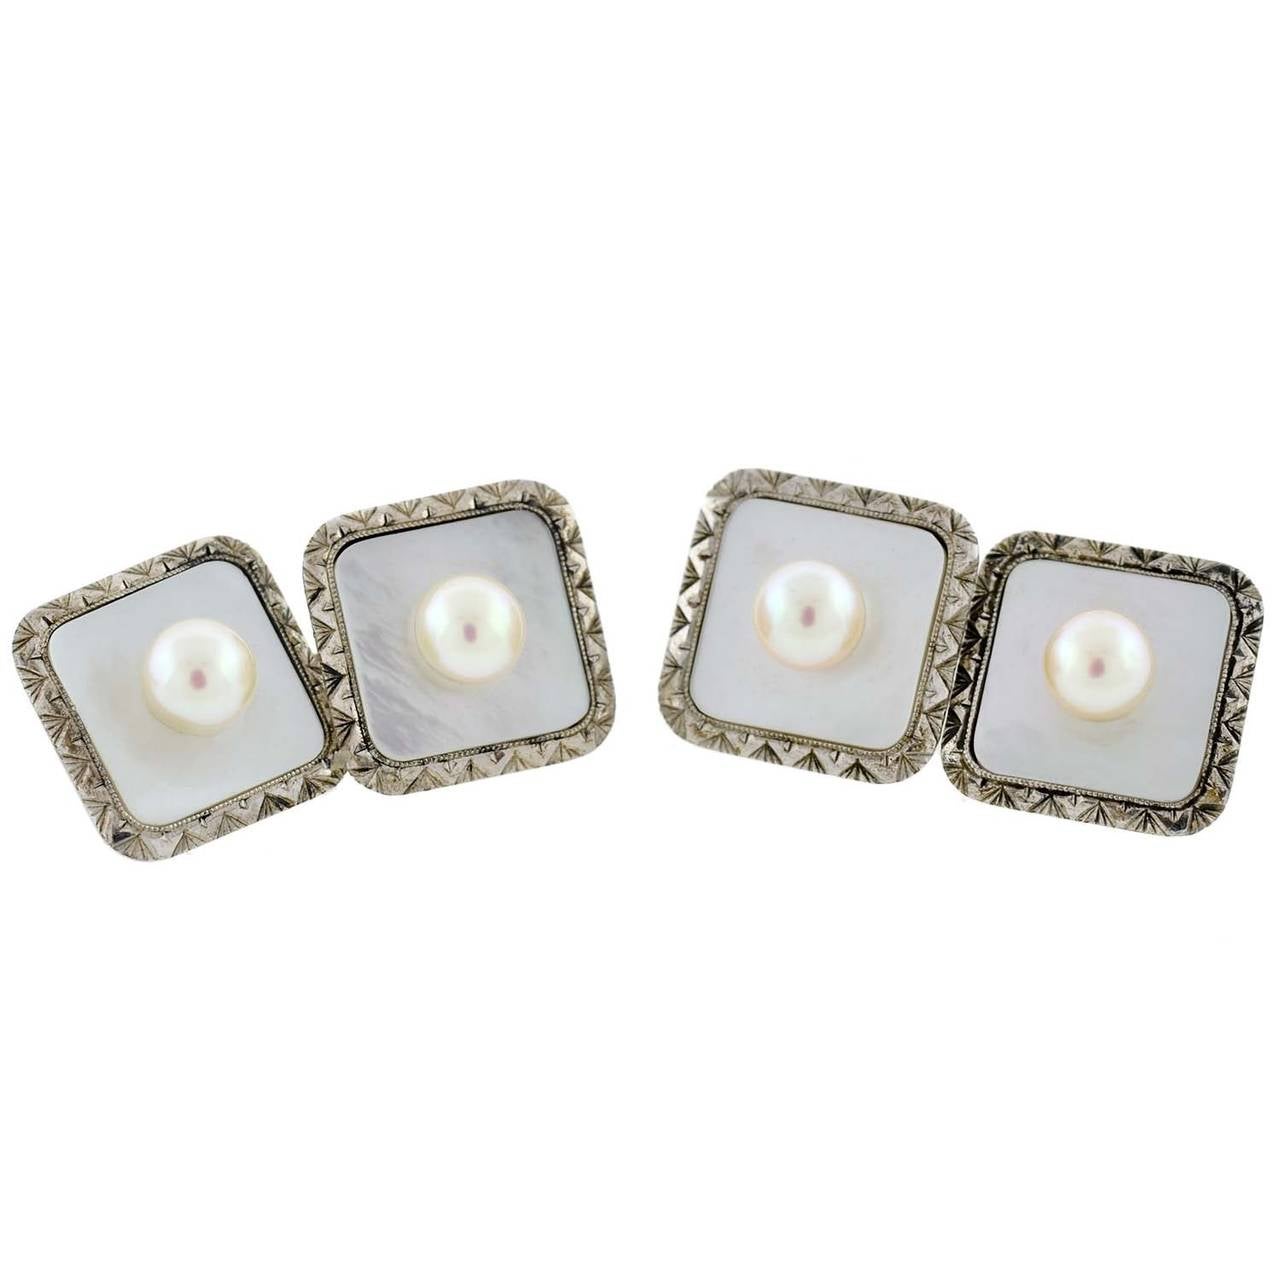 Japanese jeweler Komichi Mikimoto made his everlasting mark on history as the inventor of cultured pearls. His discovery that lustrous pearls could be created by introducing a small particle into an oyster changed the face of the jewelry world